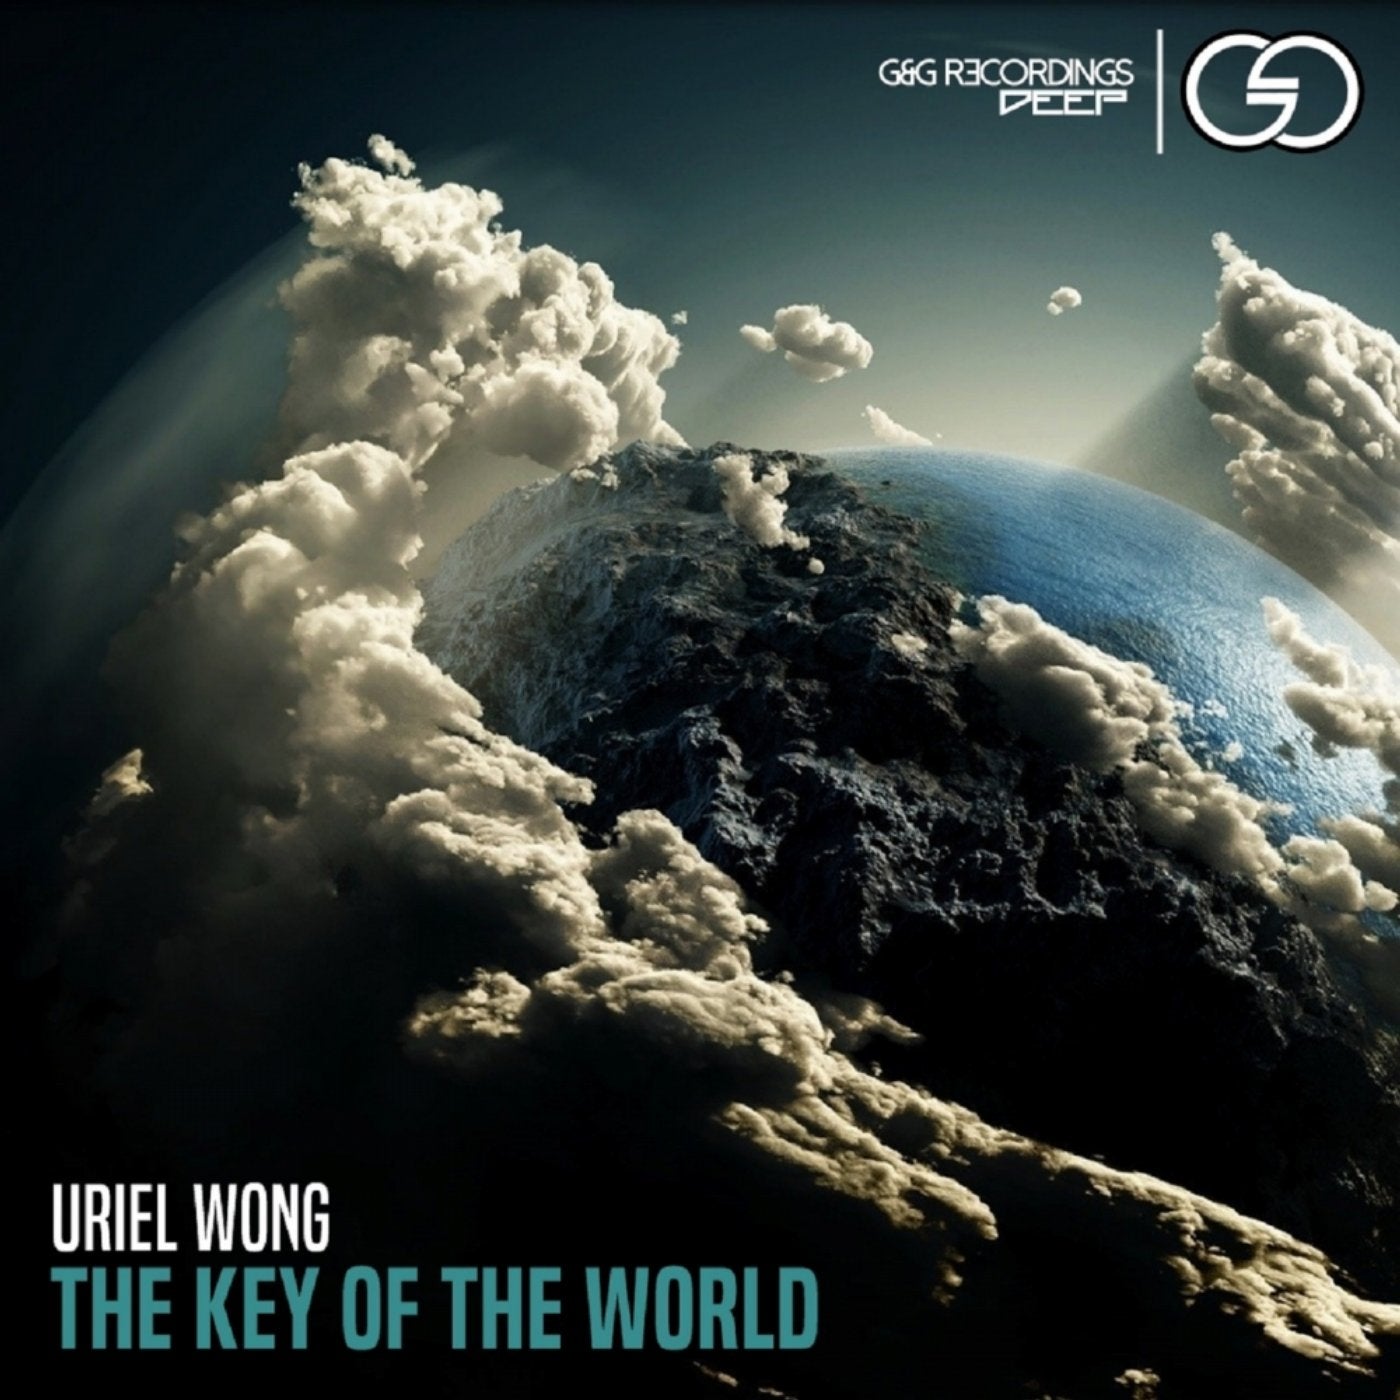 The Key Of The World